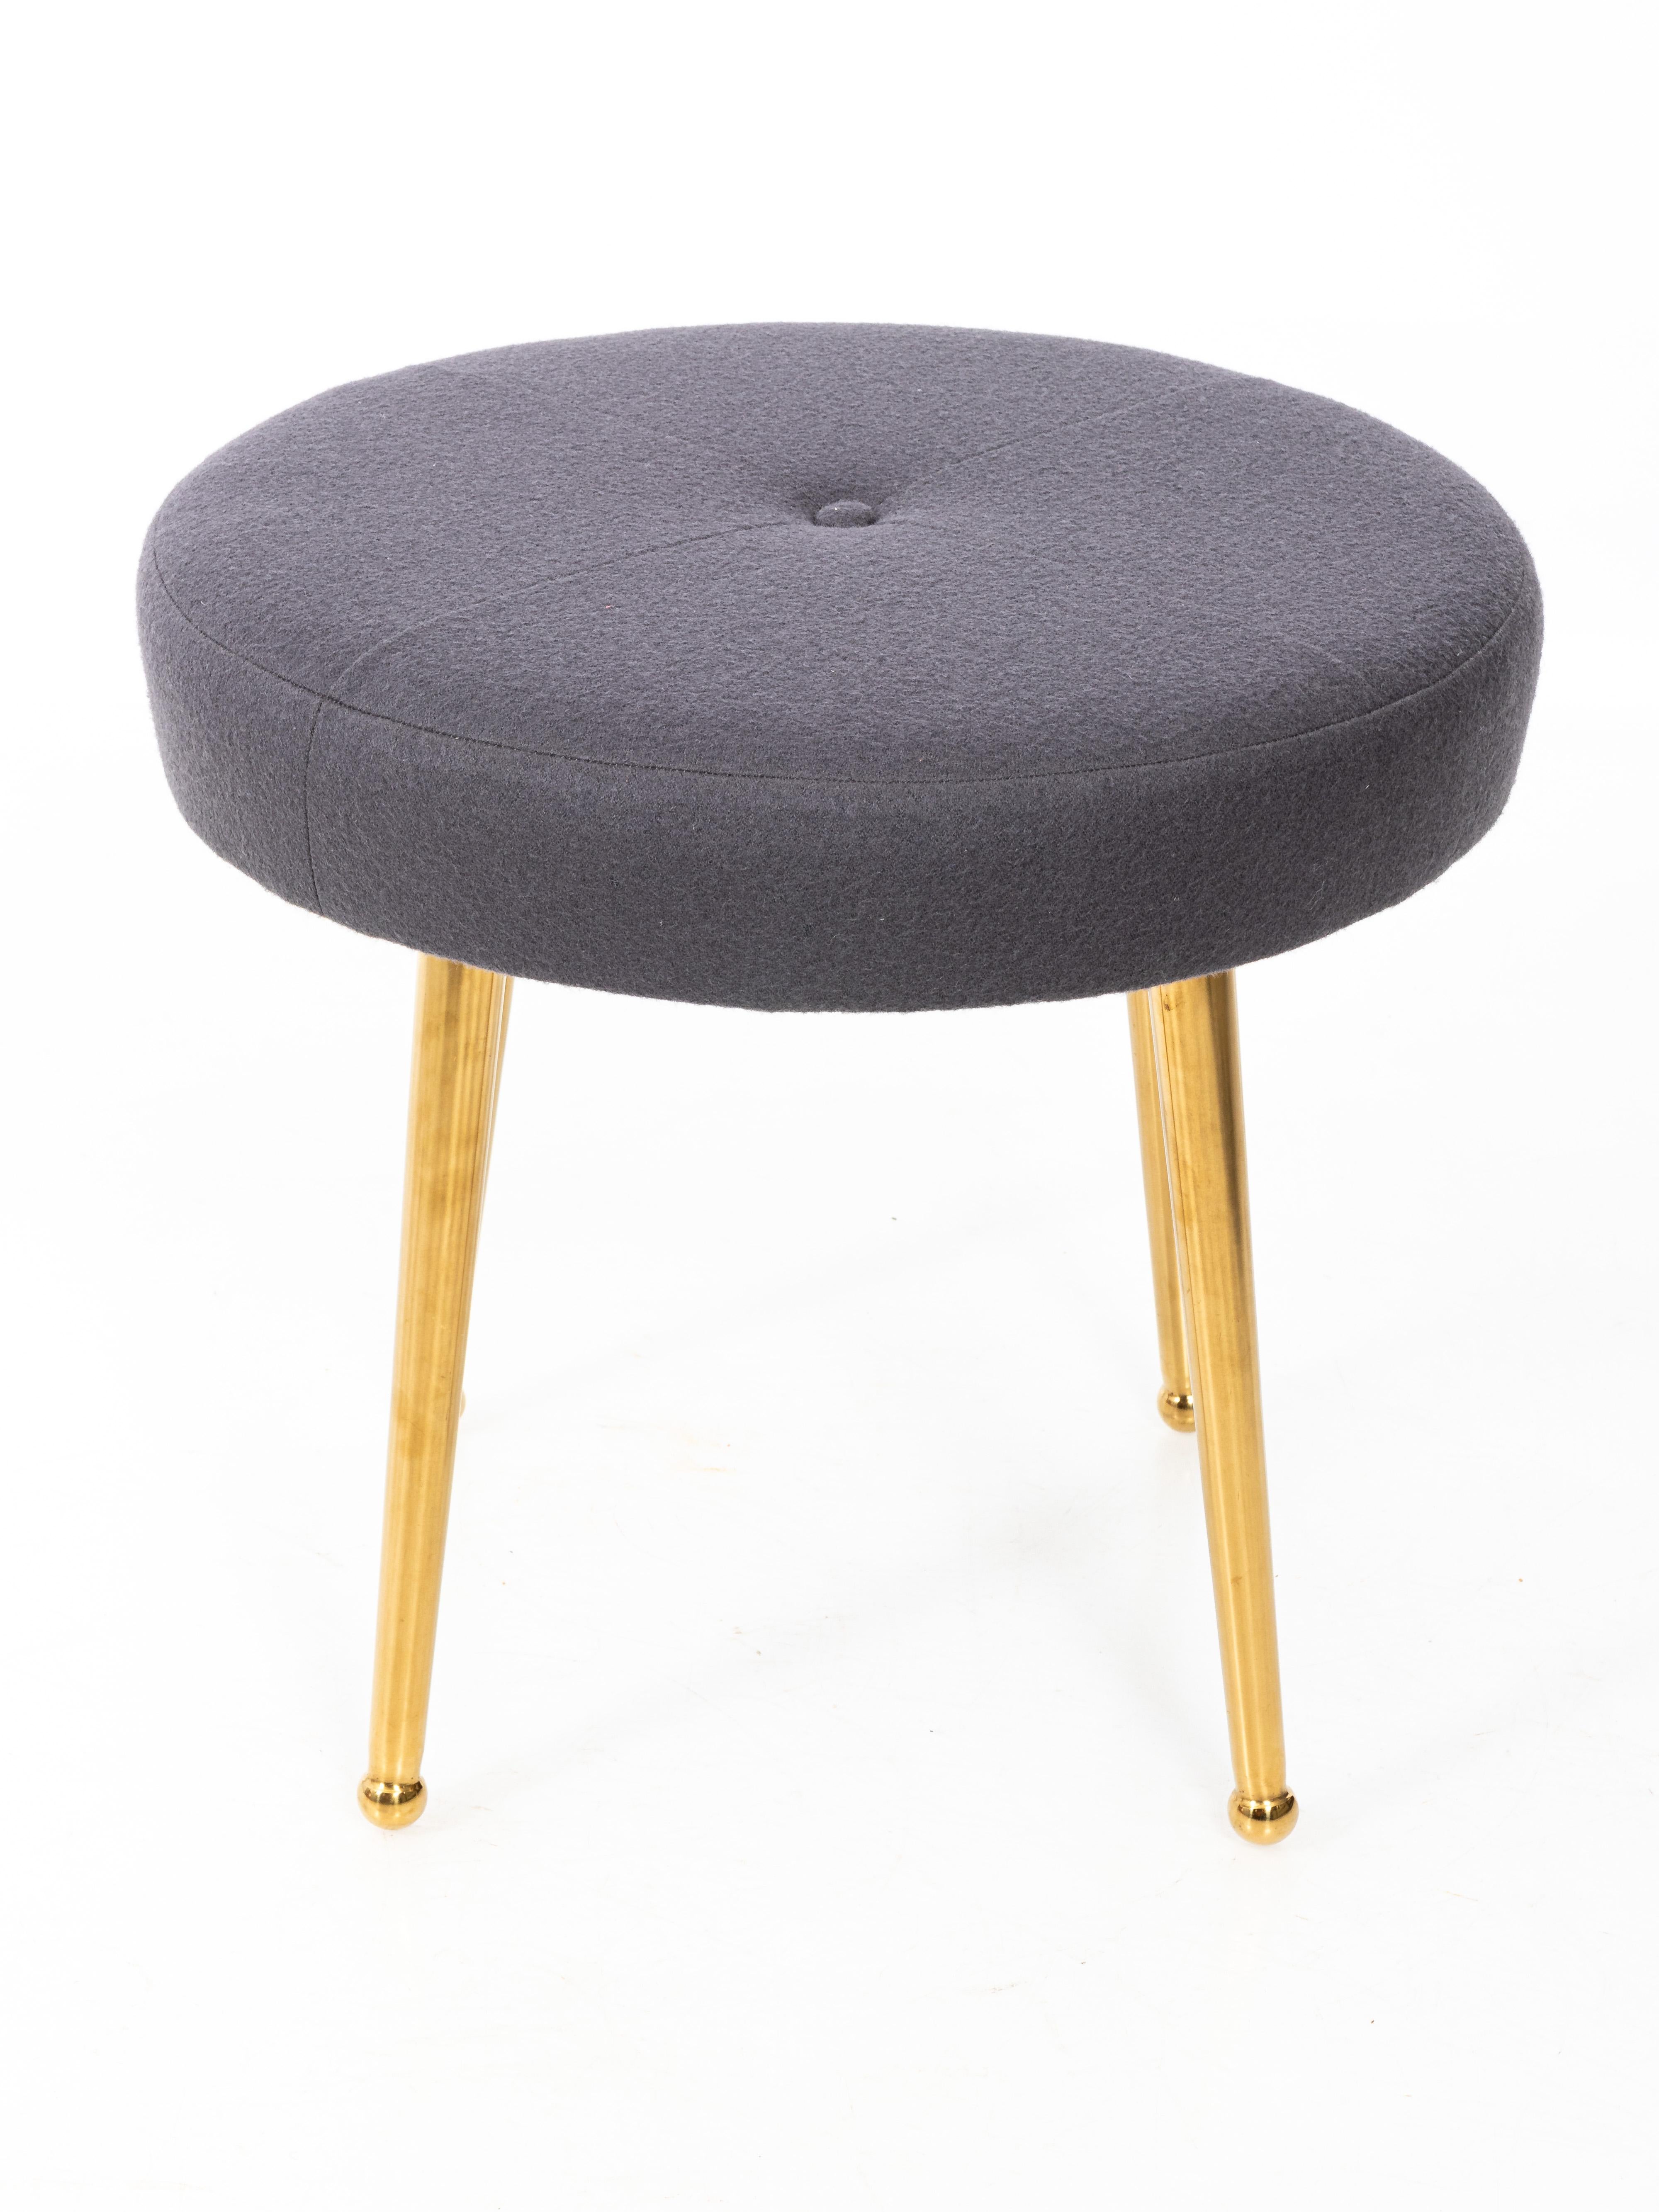 Upholstery Custom Pair of Midcentury Style Round Stools with Brass Legs For Sale